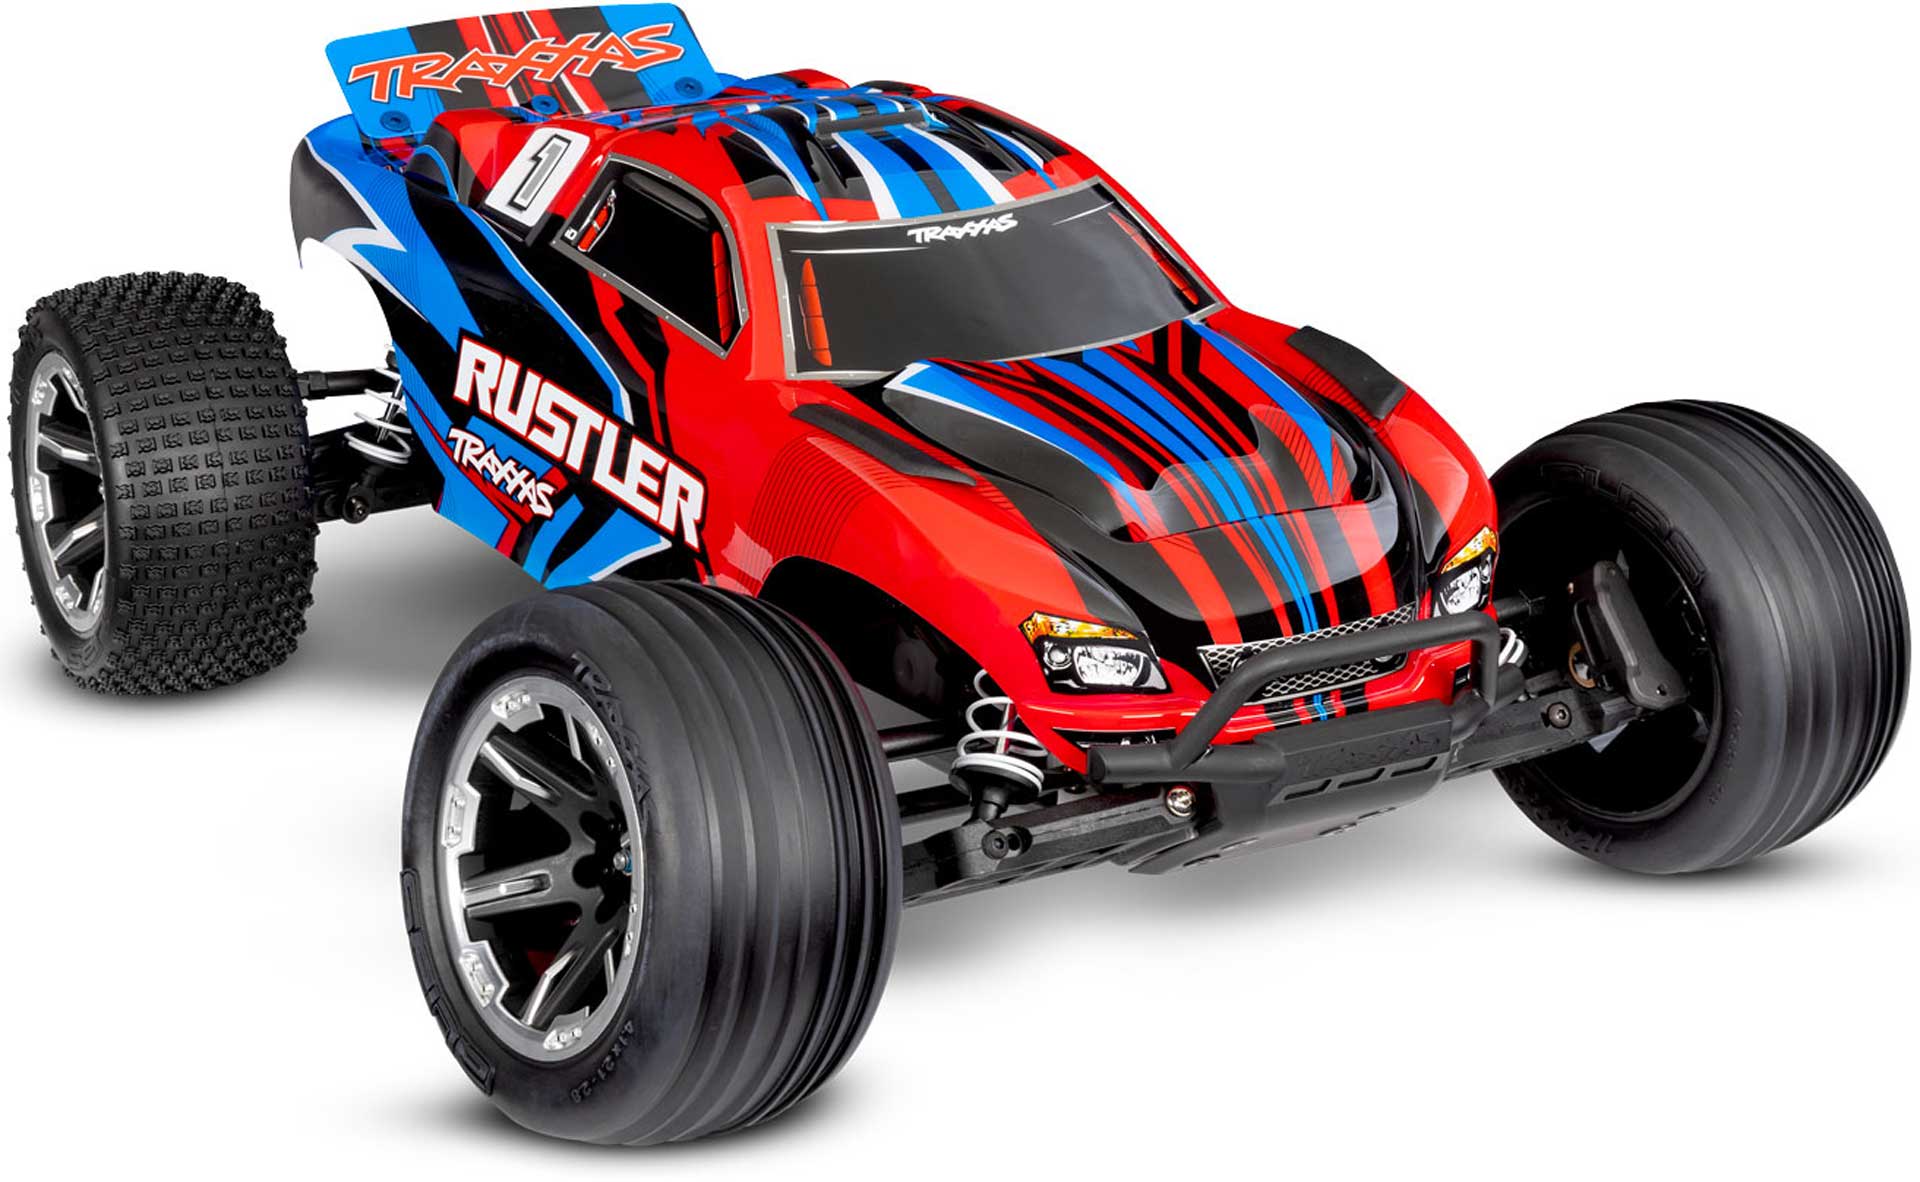 TRAXXAS RUSTLER RED 1/10 2WD STADIUM-TRUCK RTR BRUSHED, HD, WITH BATTERY AND 4AMPER USB